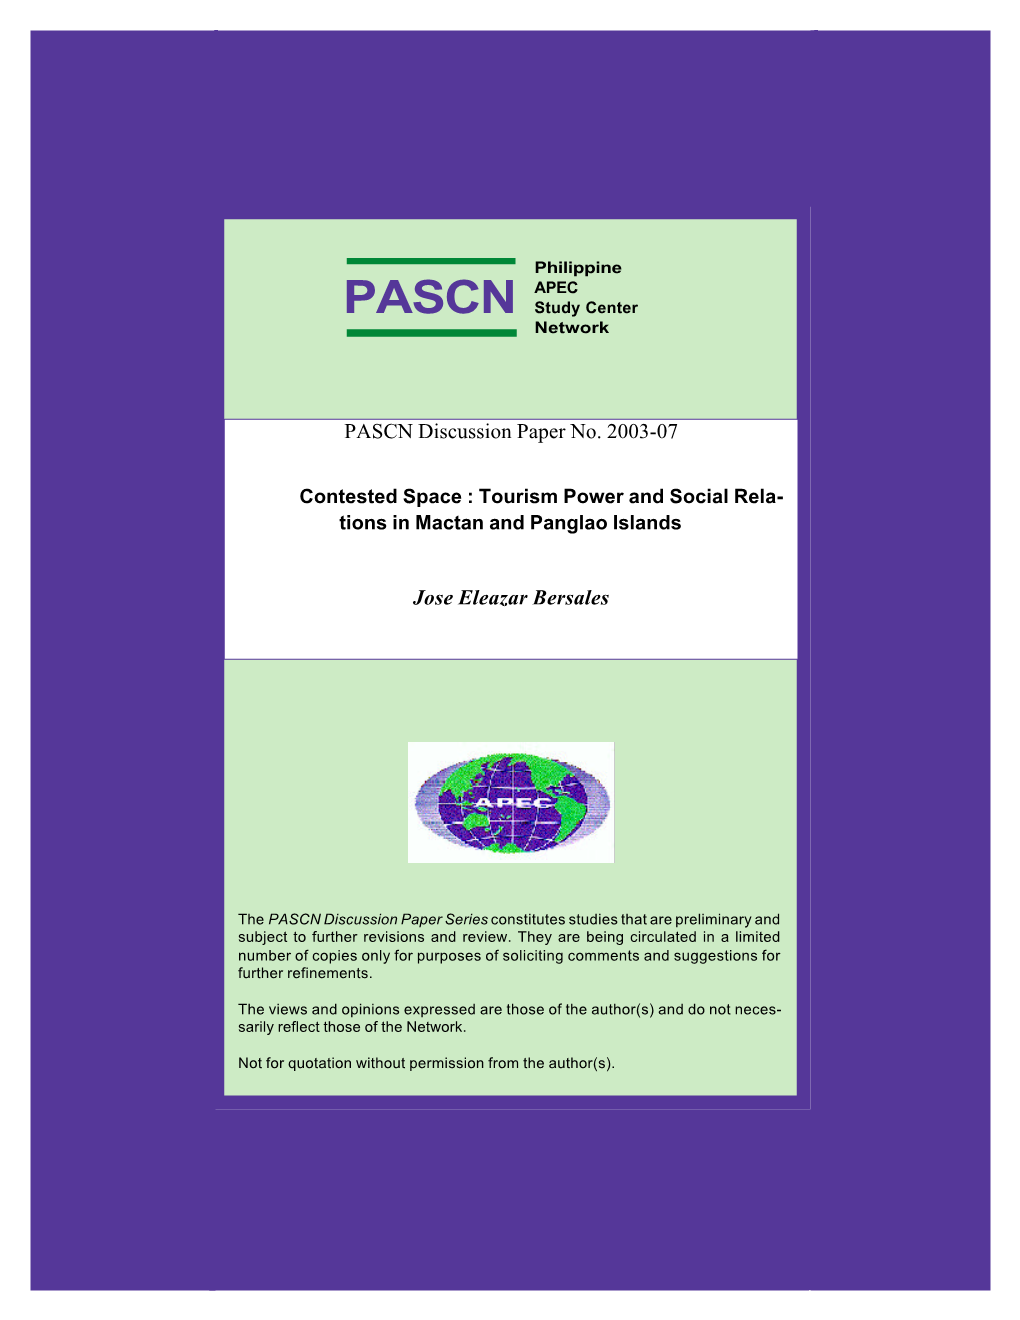 Contested Space: Tourism Power and Social Relations in Mactan and Panglao Islands